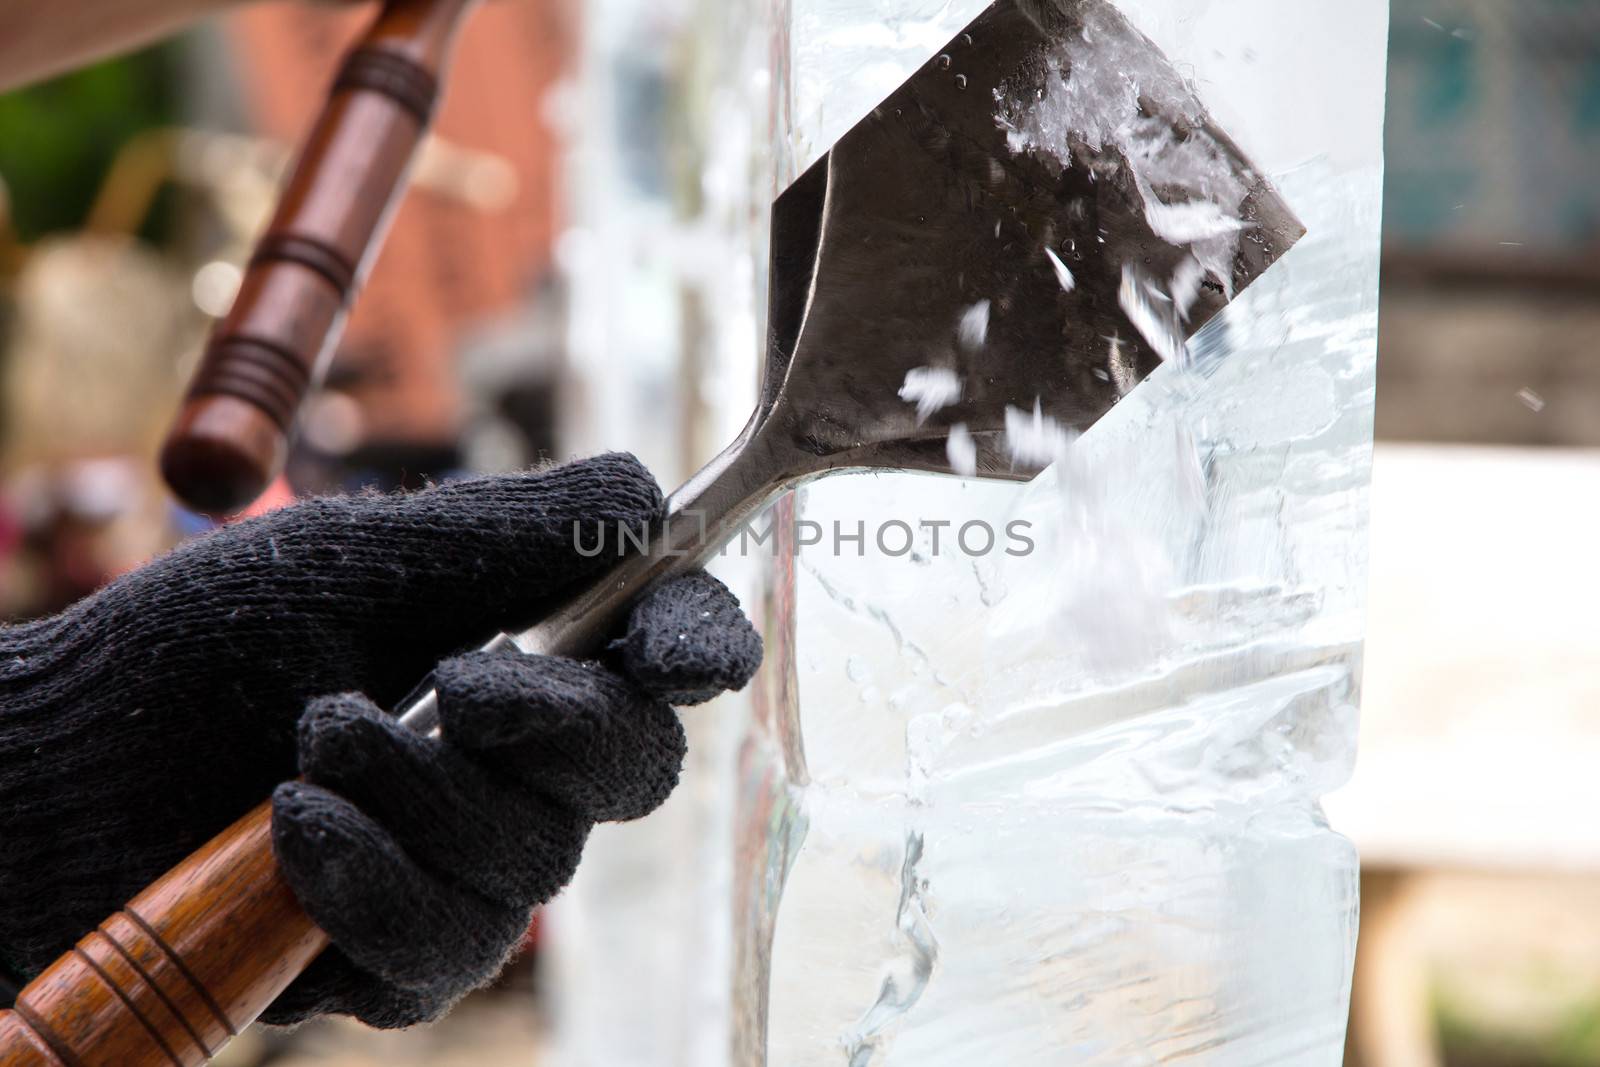 Ice Carver Using Chisel to Carve